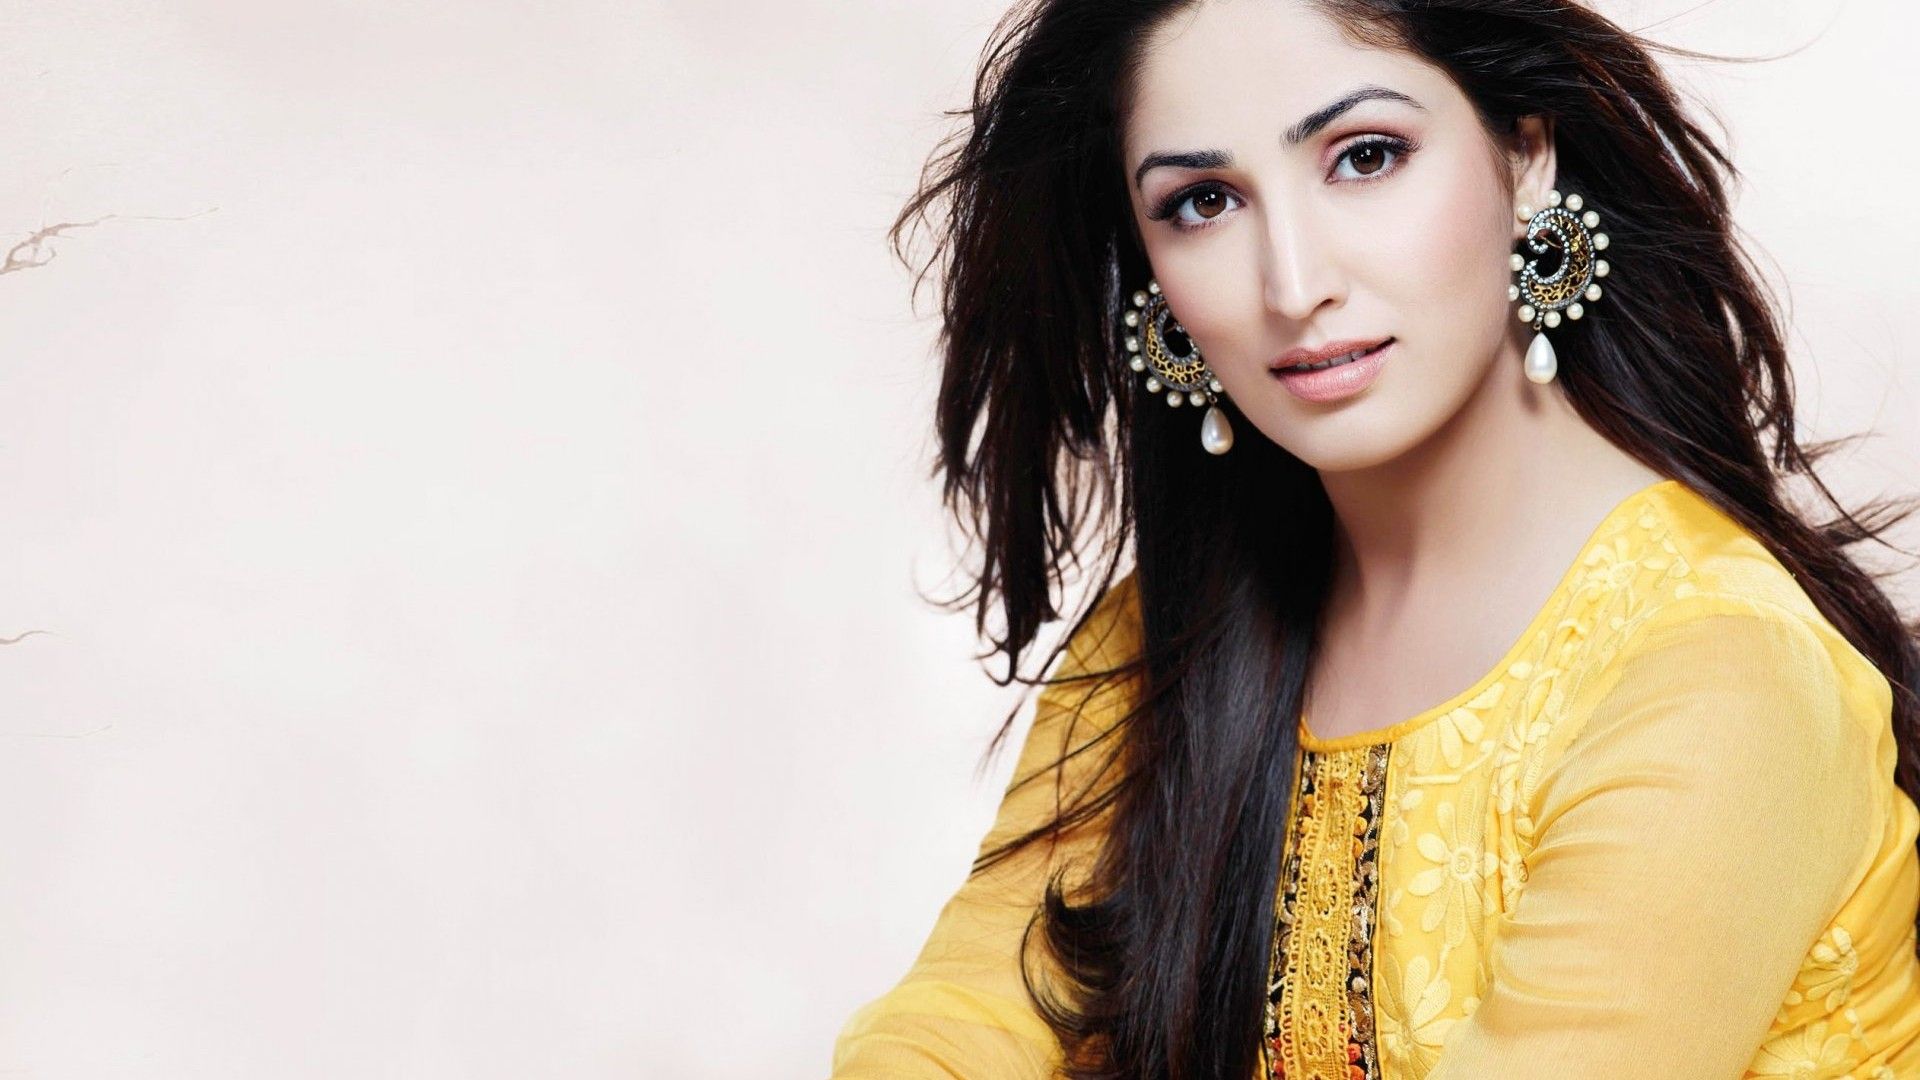 Wonderful bollywood actress hd wallpapers 1366x768 On Windows